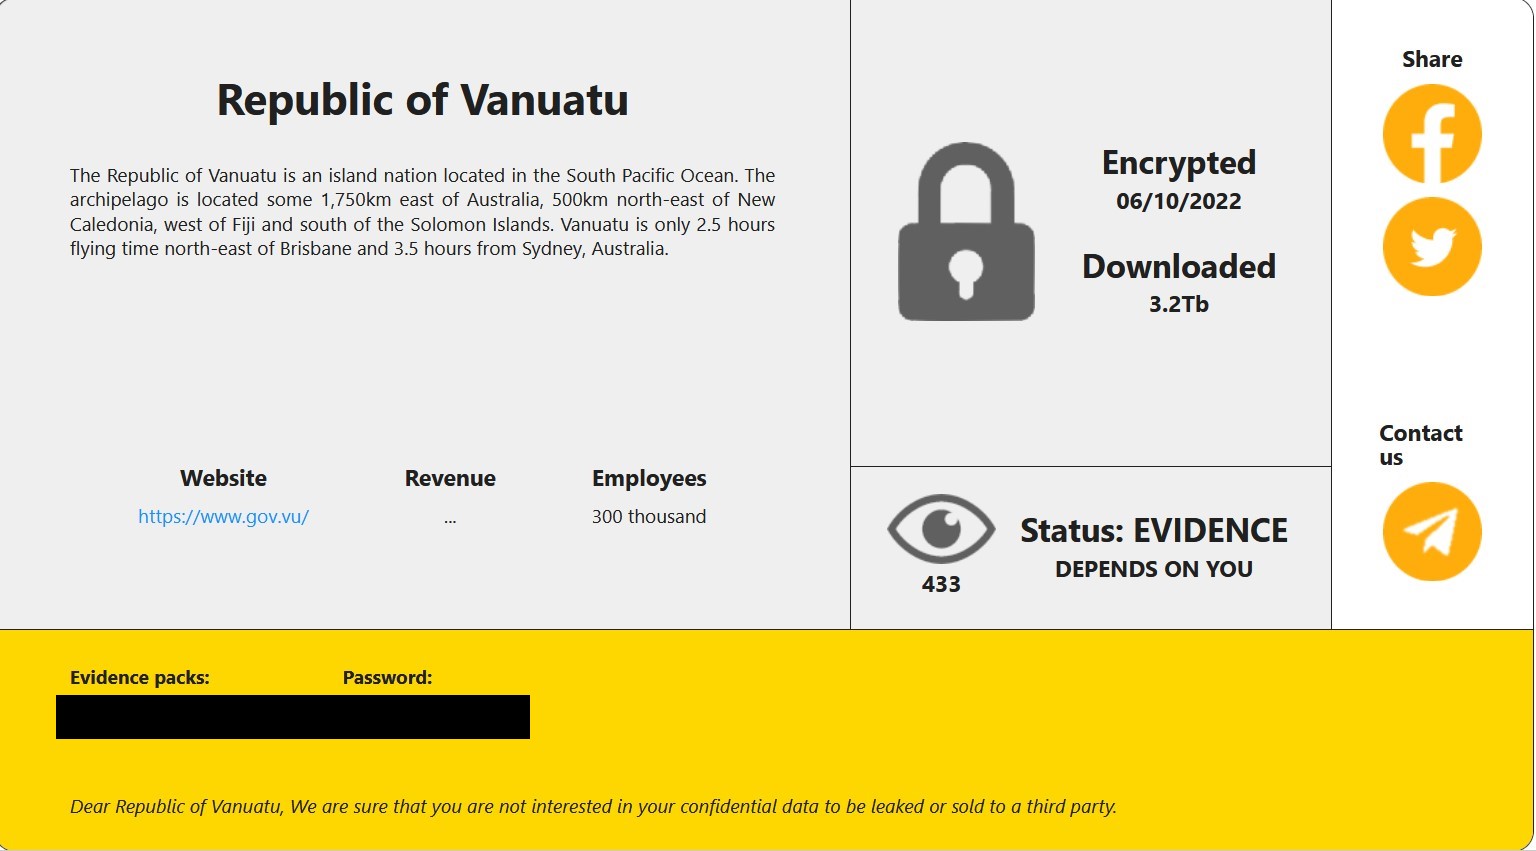 RansomHouse lists Vanuatu as a victim and claims to have exxfiltrated 3.2 TB of data. 